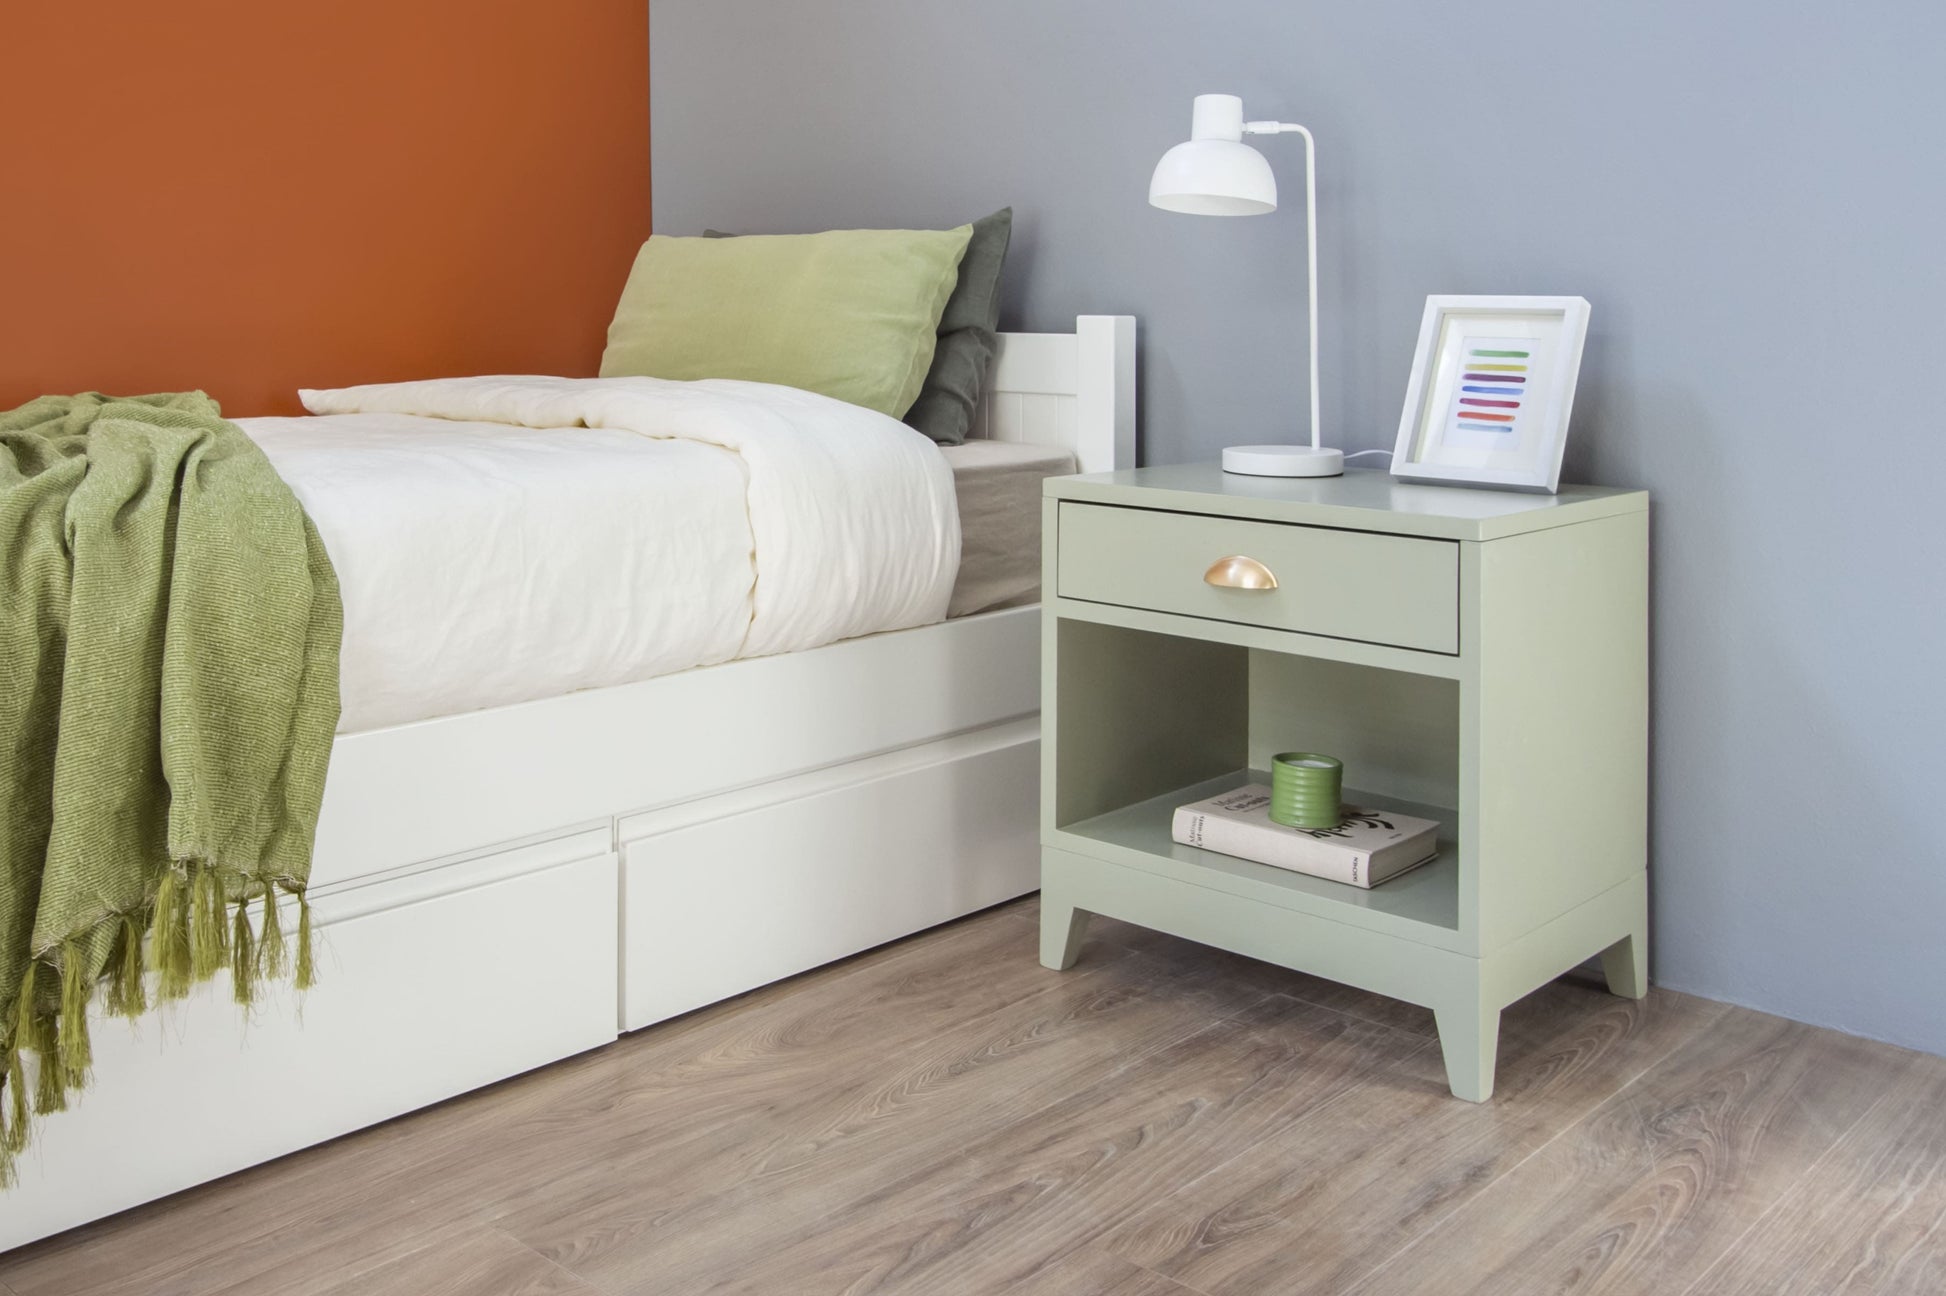 Hydra bed side table - The Room